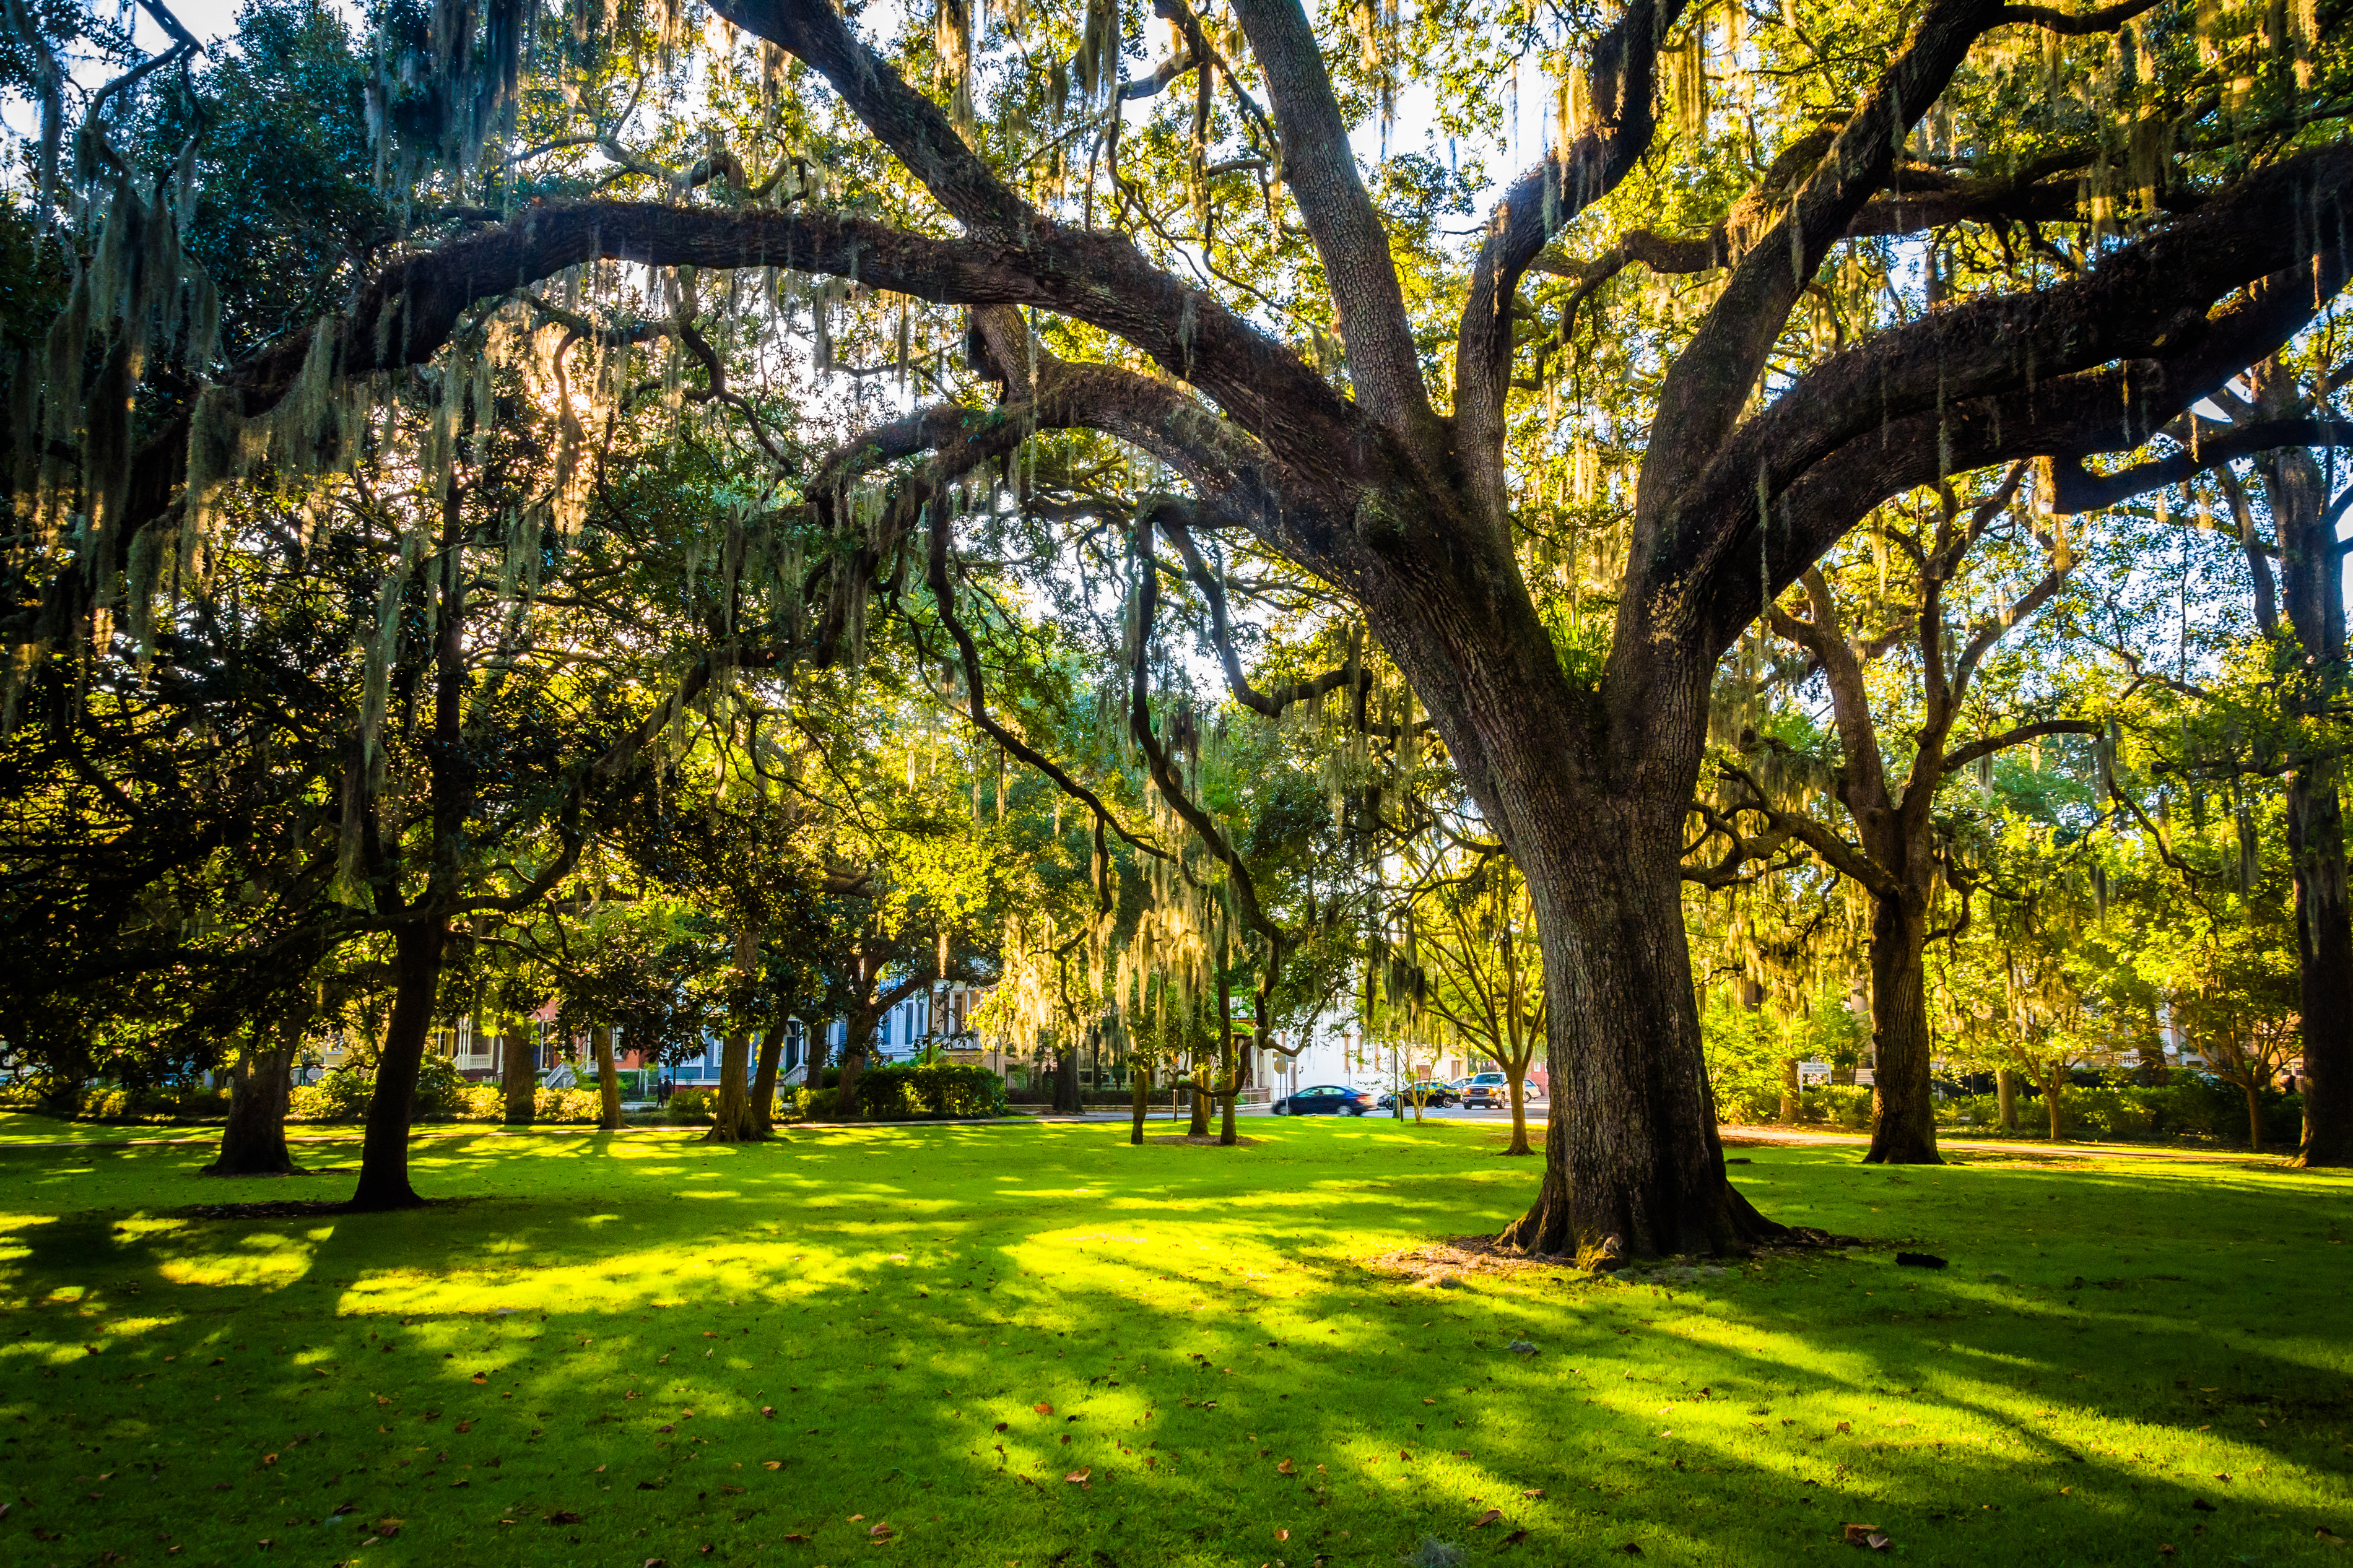 Large trees in a park with Spanish Moss